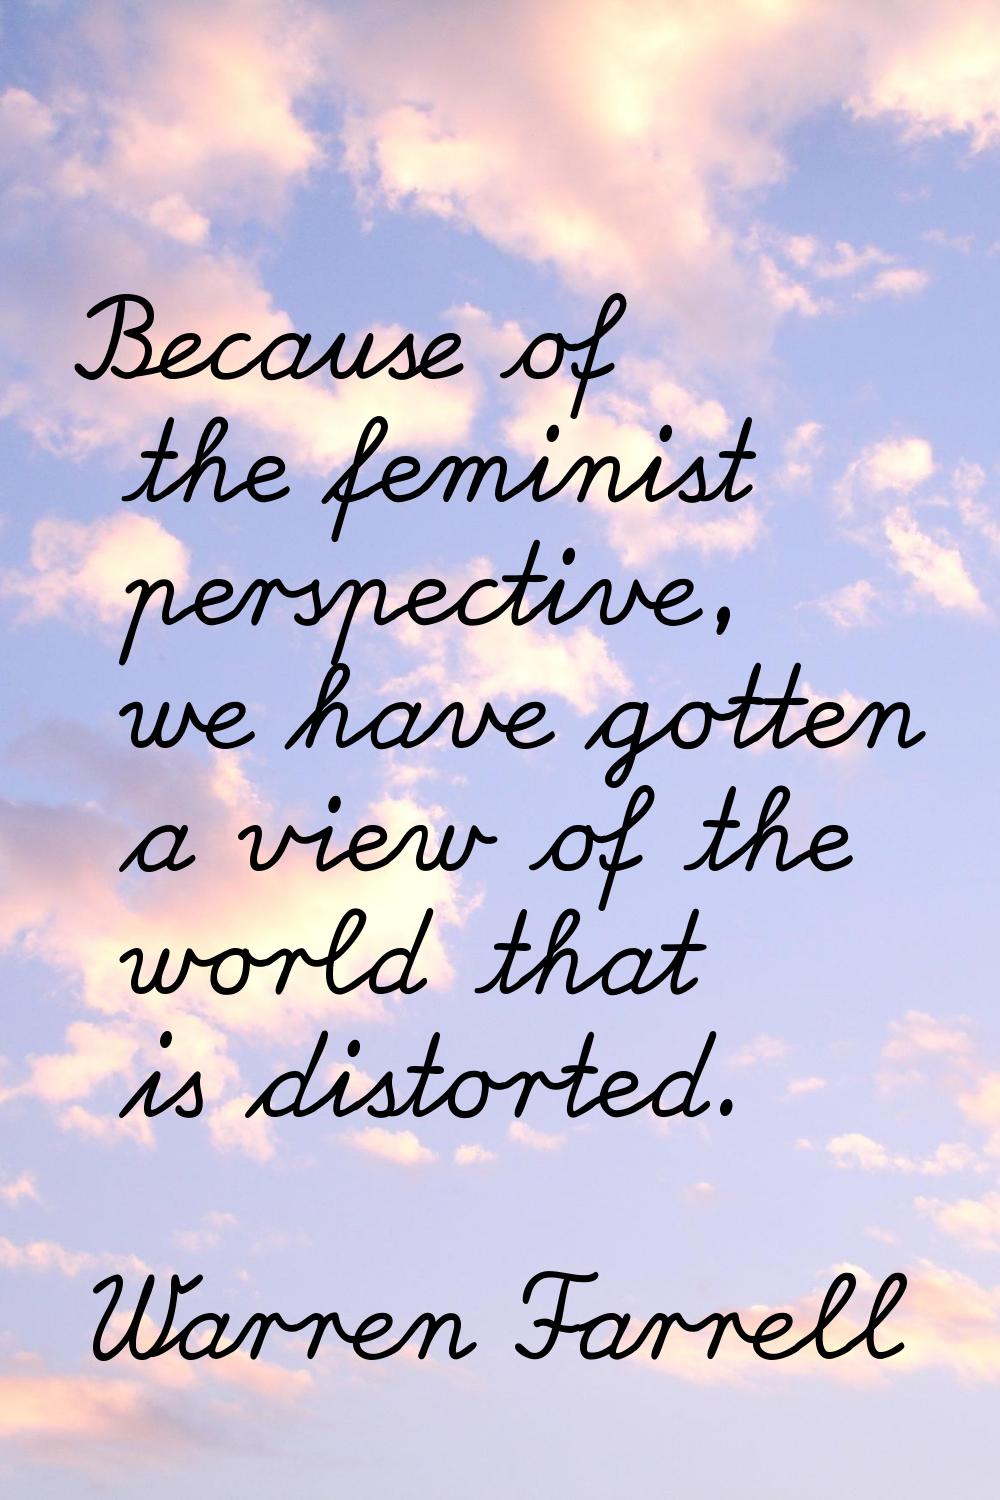 Because of the feminist perspective, we have gotten a view of the world that is distorted.